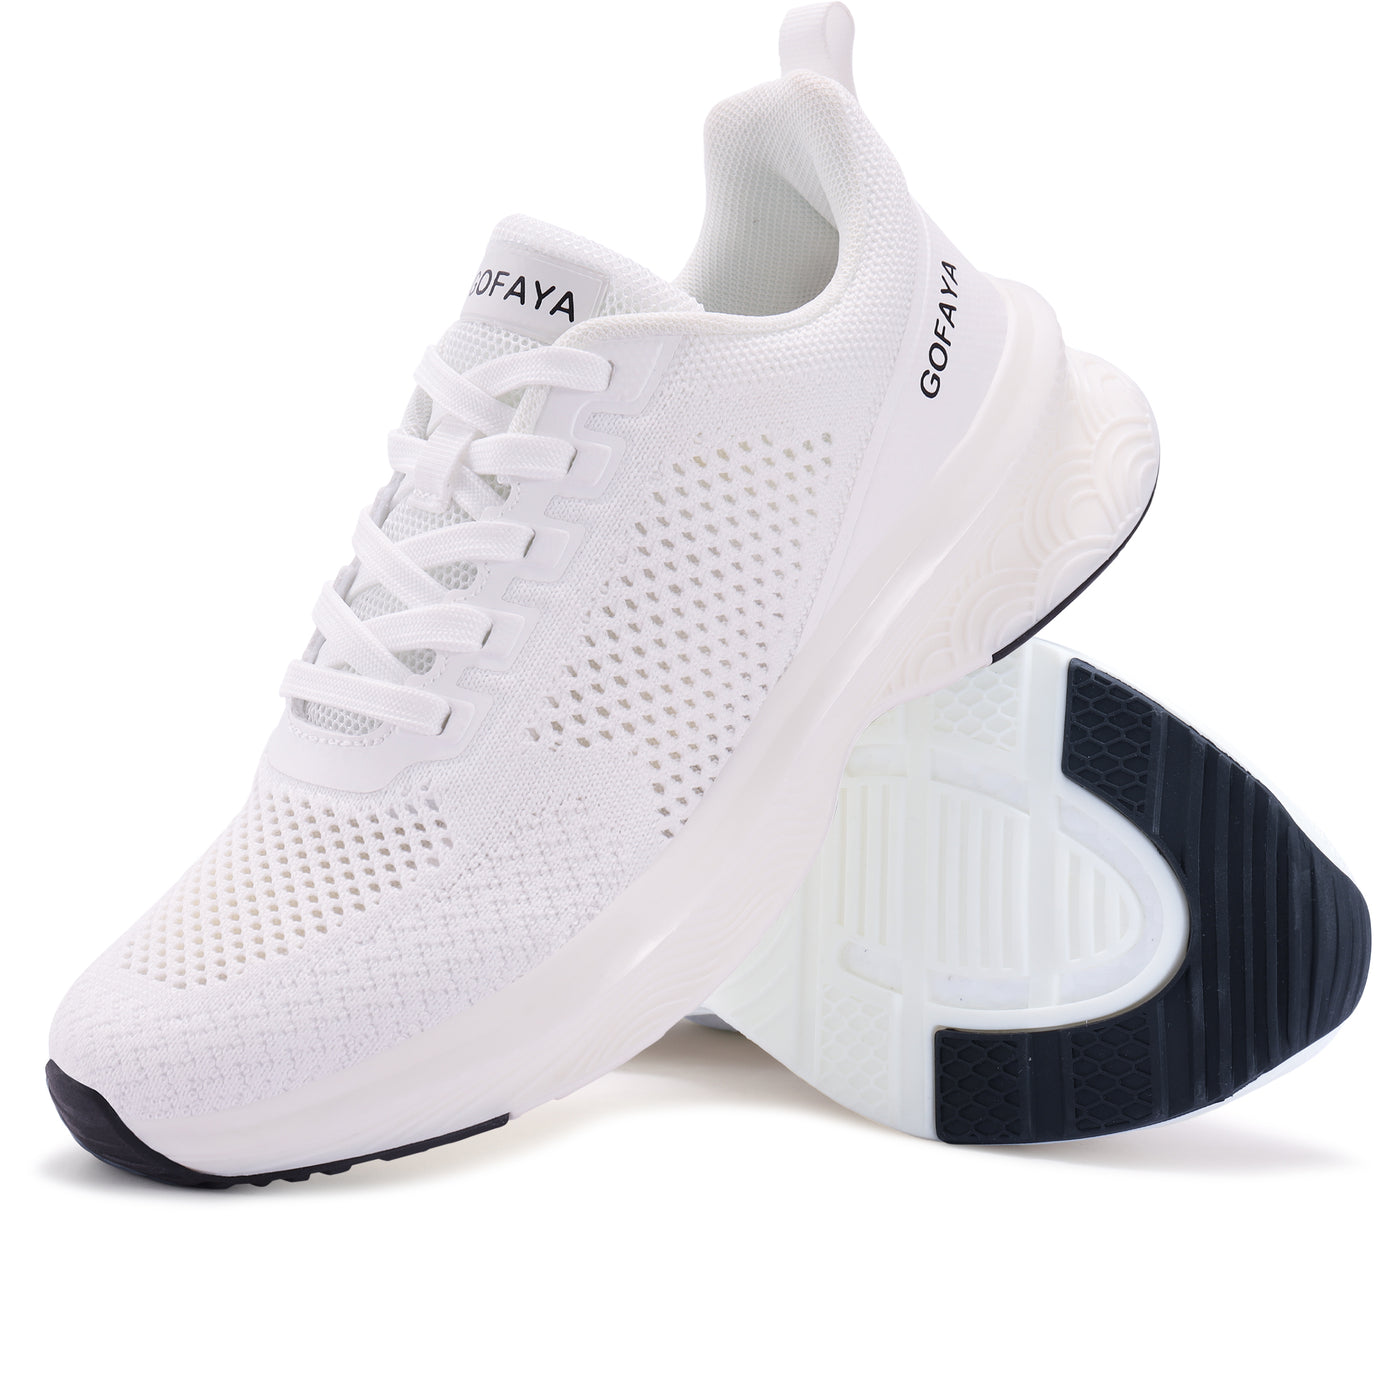 Just So So women's breathable sneakers